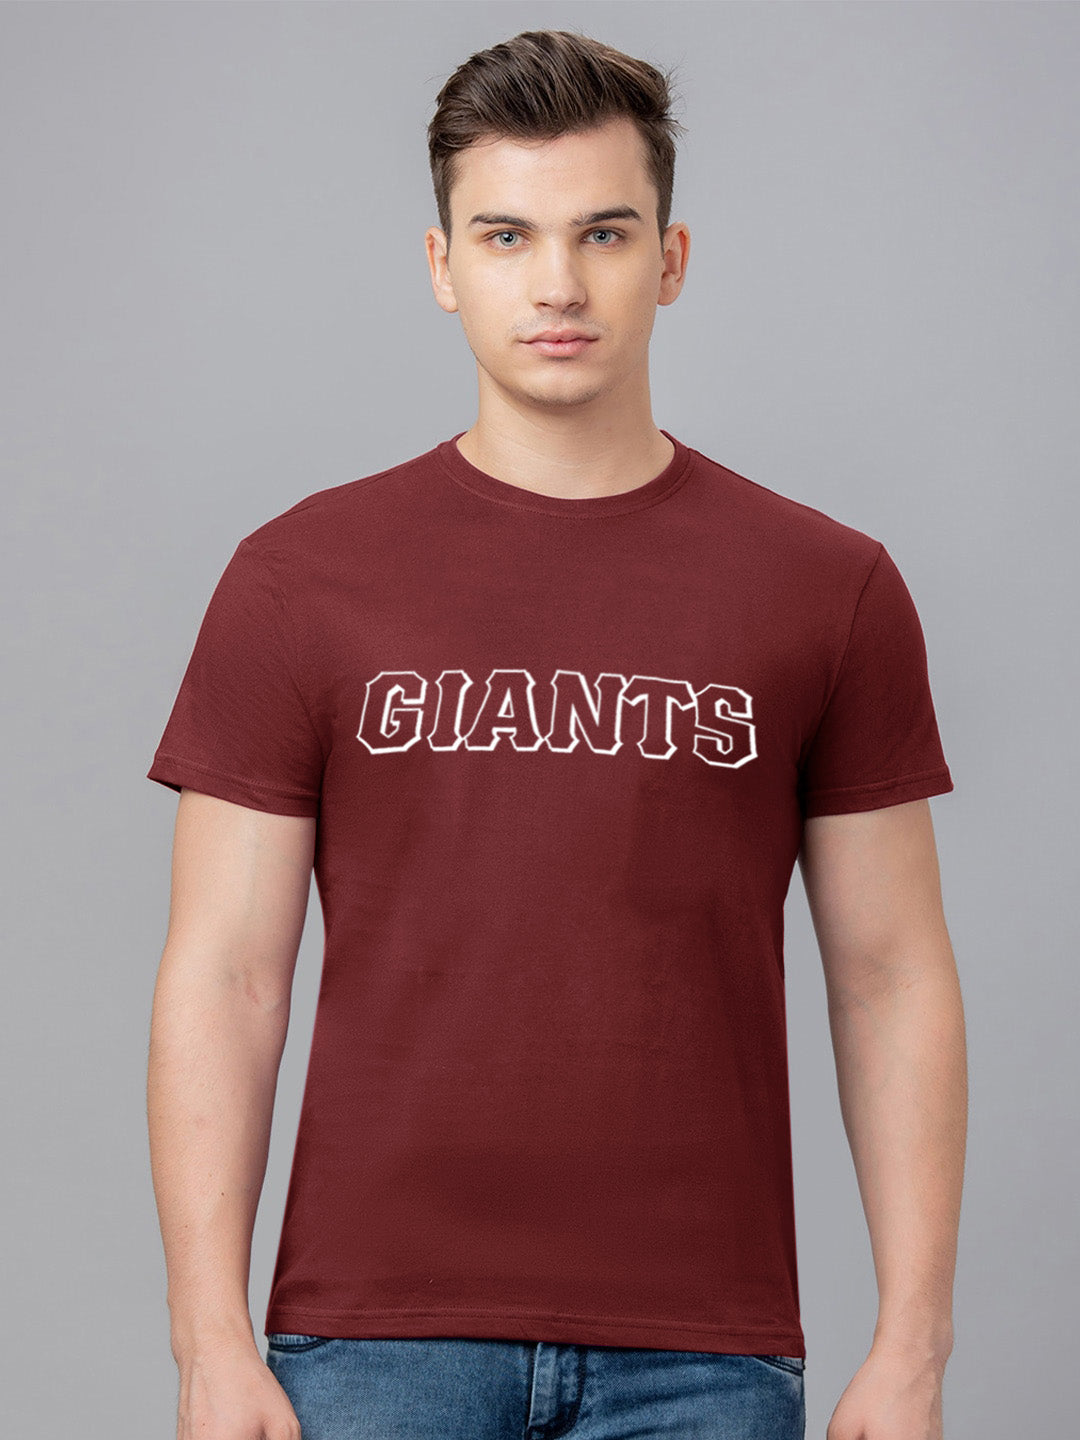 47 Single Jersey Crew Neck Tee Shirt For Men-Maroon with Print-SP1656/RT2396